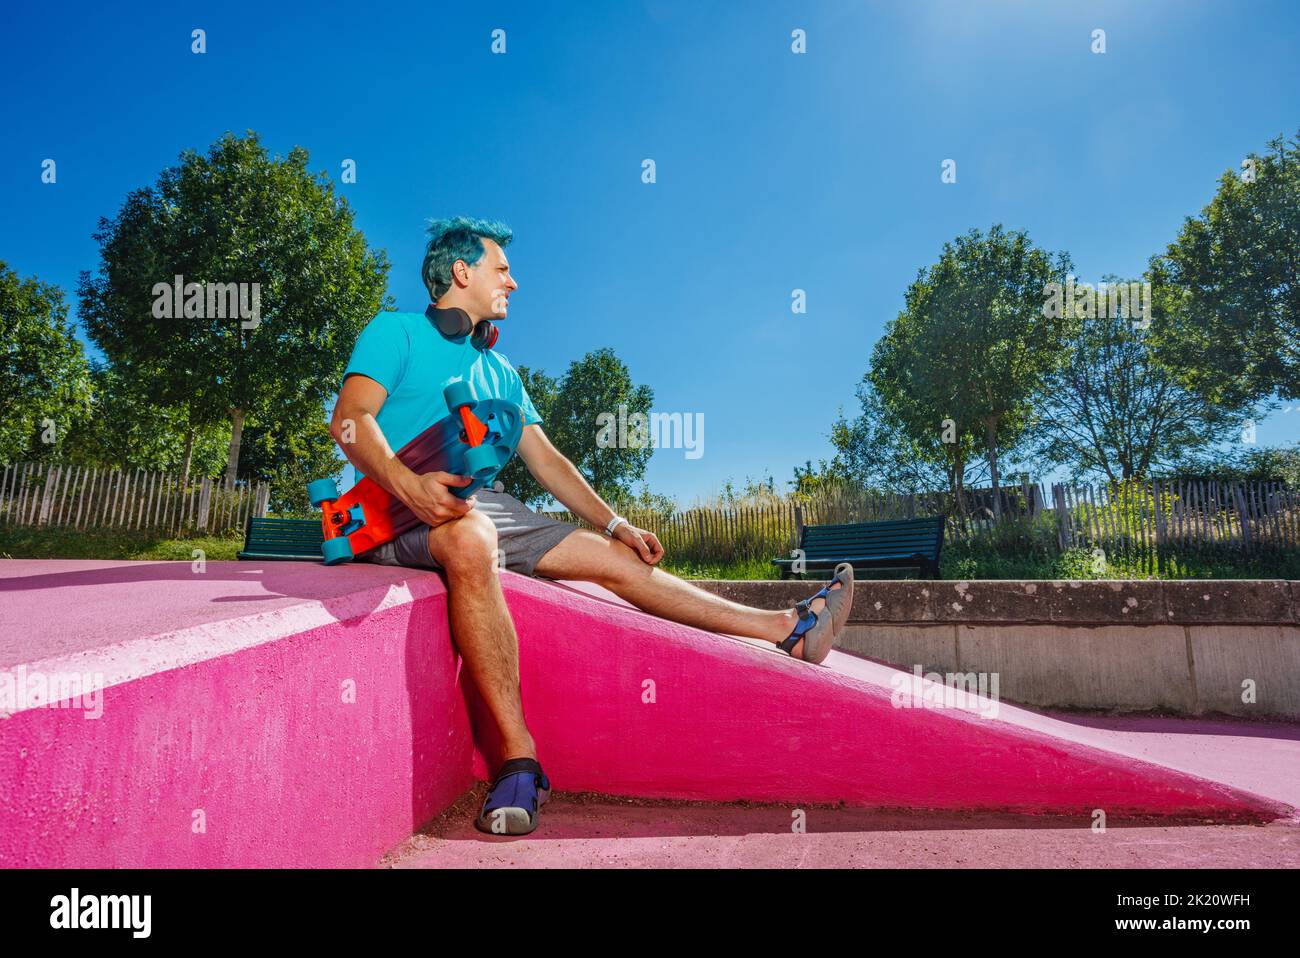 Portrait of a man with blue hair sit holding skateboard in park Stock Photo